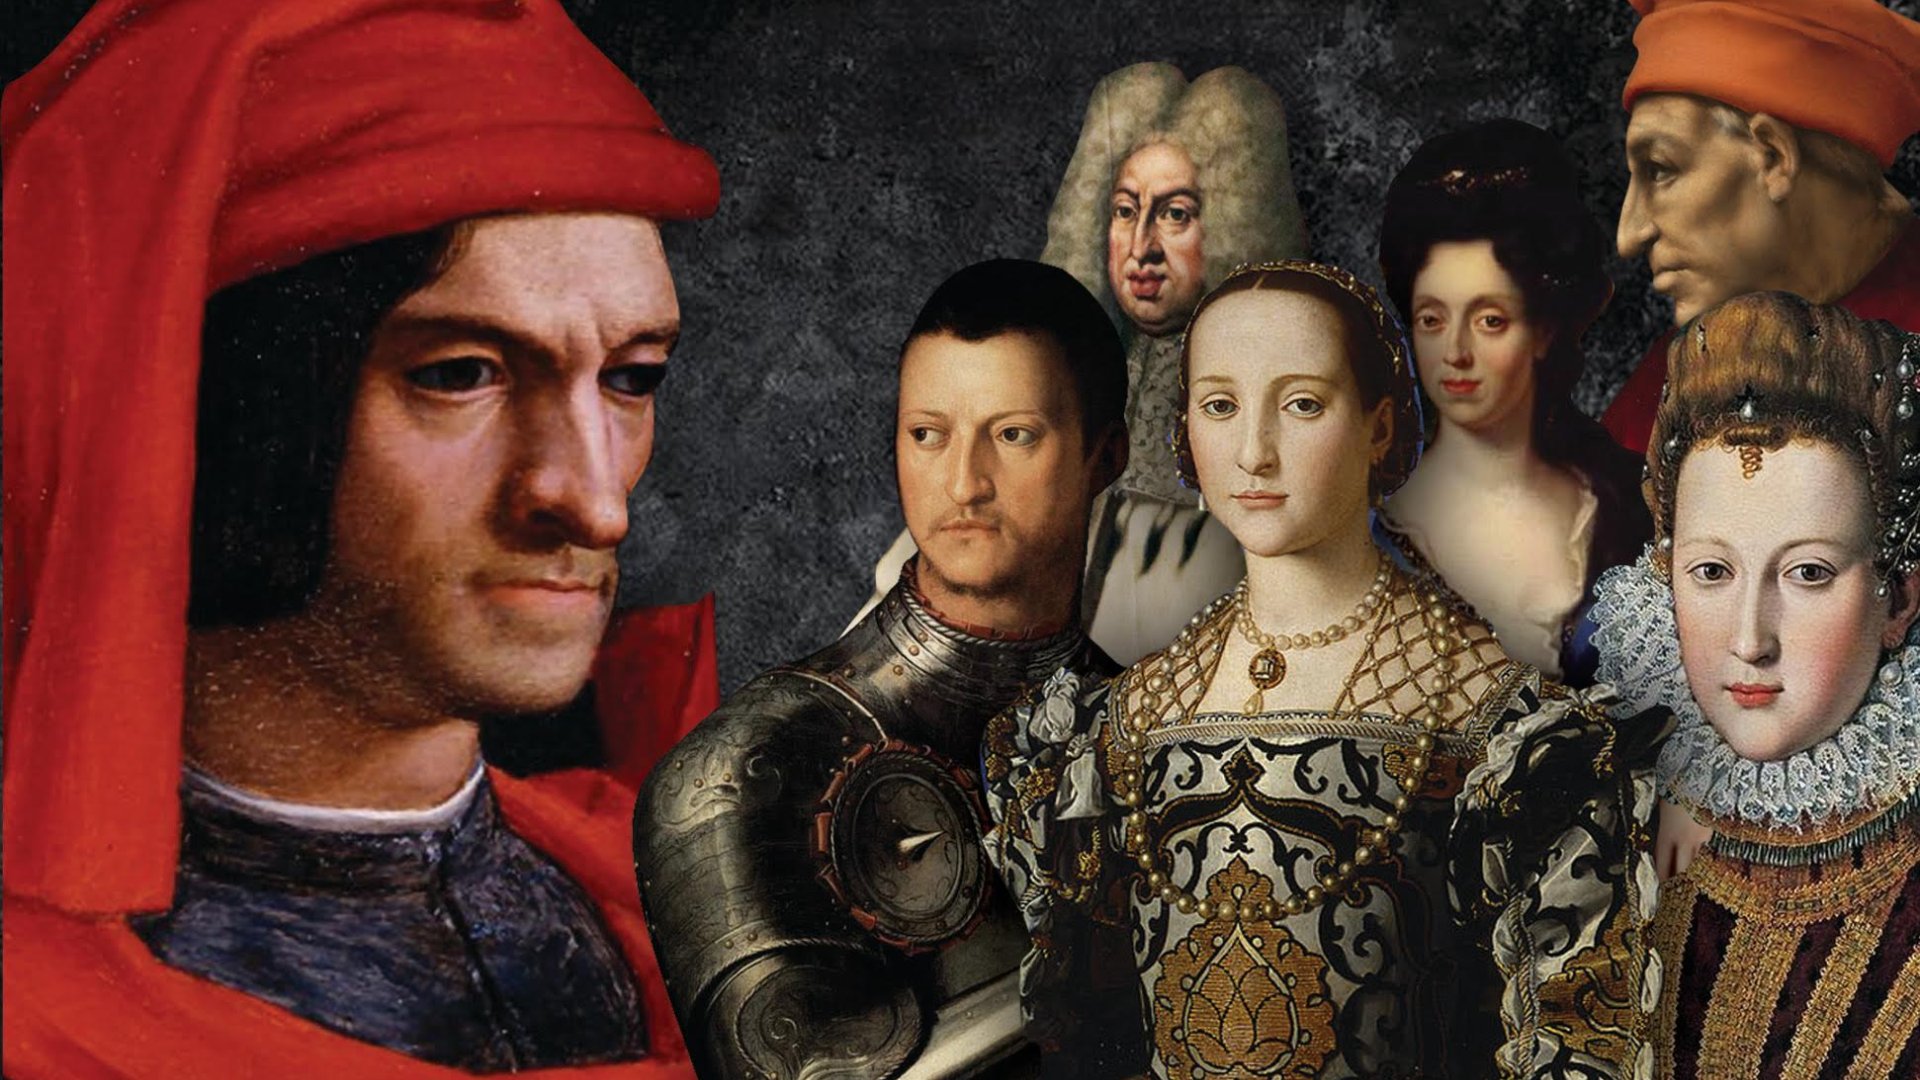 A walking tour of the streets of Florence to discover the Medici family and their power